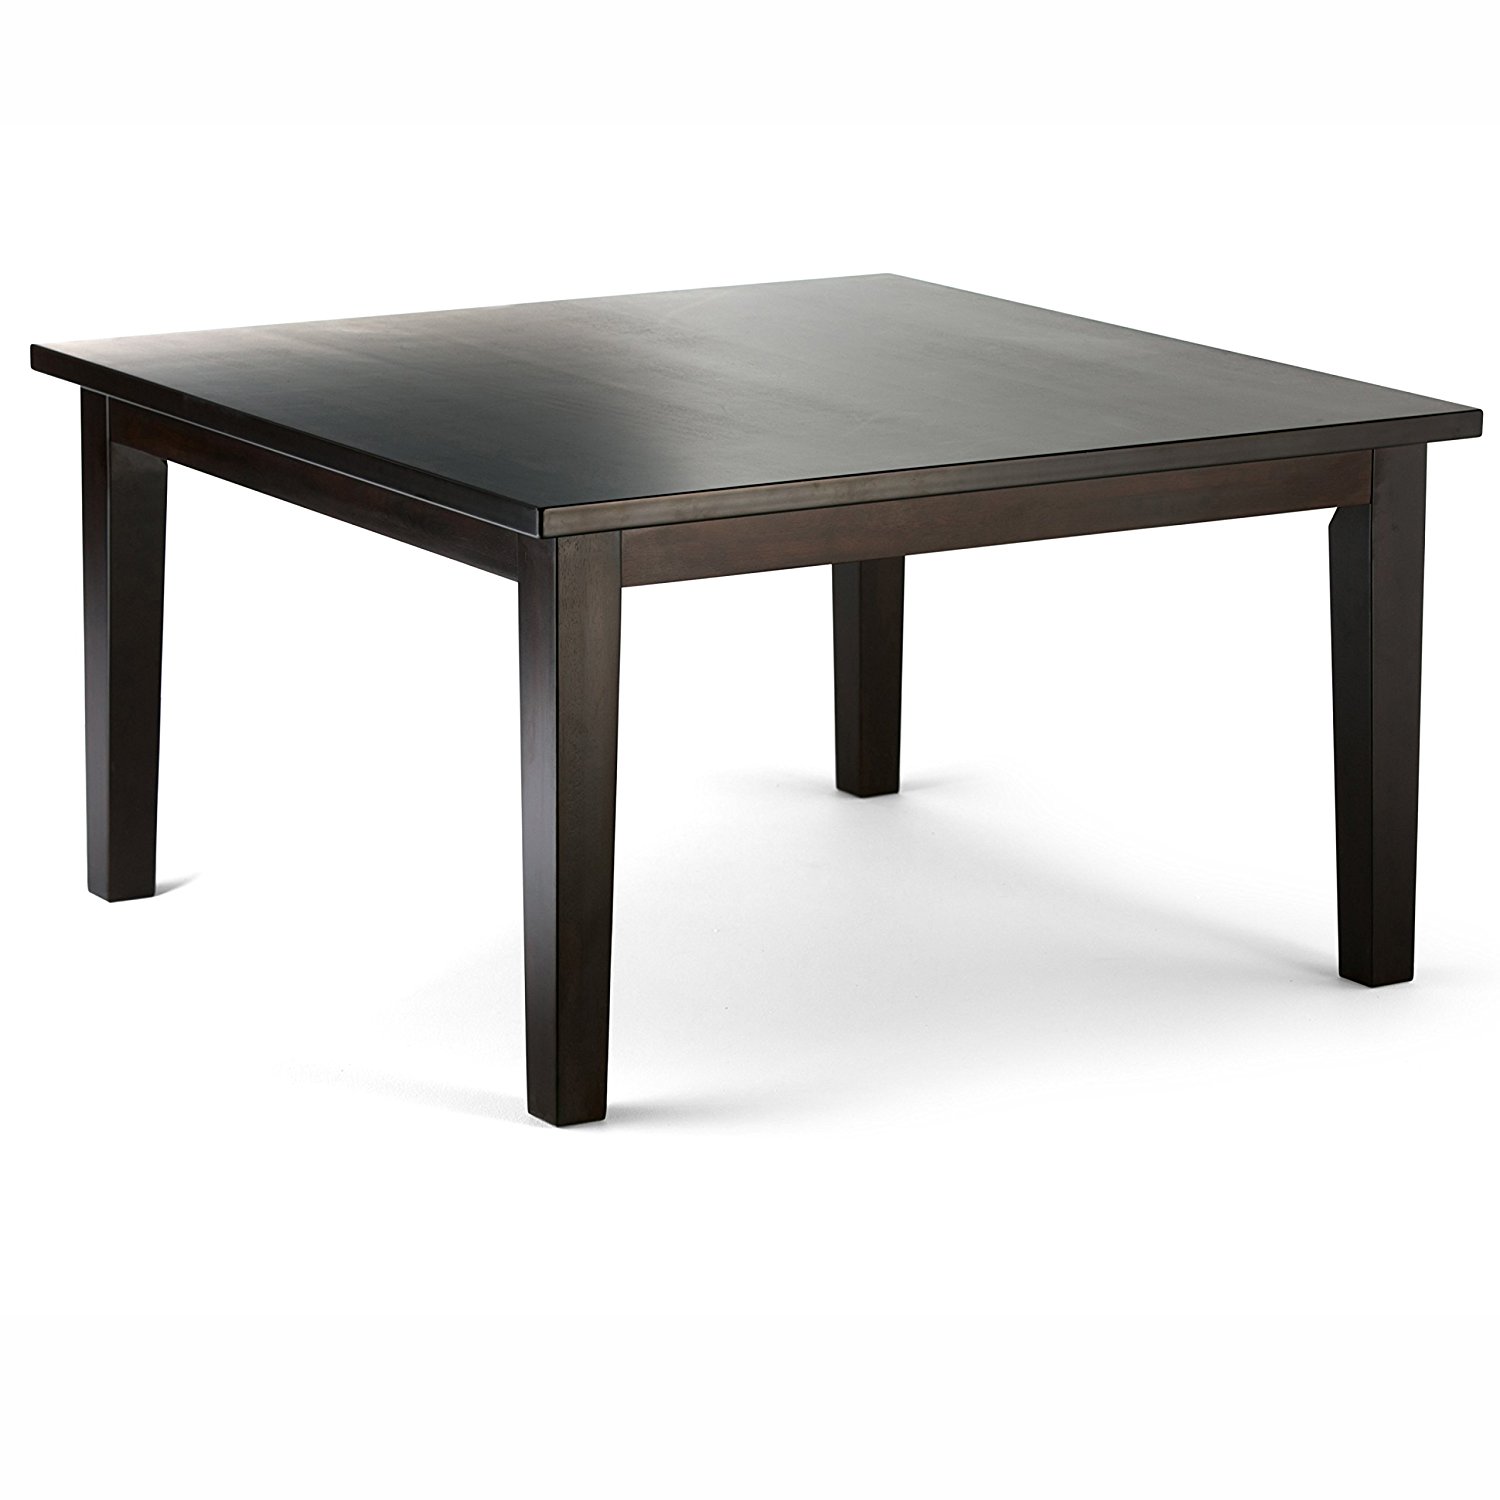 Simpli Home Eastwood Square Dining Table, 54" x 54", Java Brown